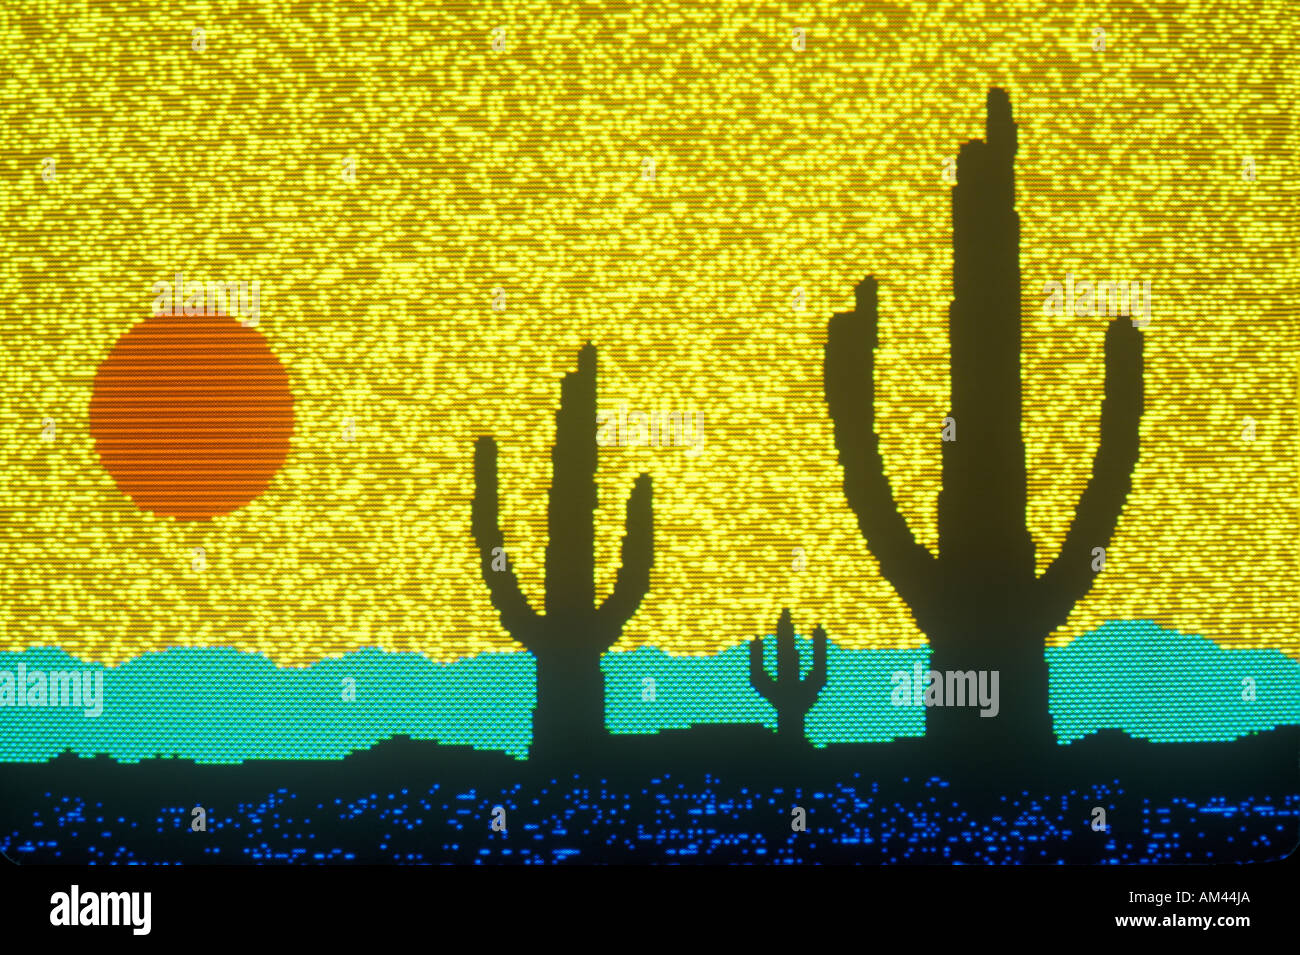 Early computer graphic of desert scene with cactus and sun Stock Photo